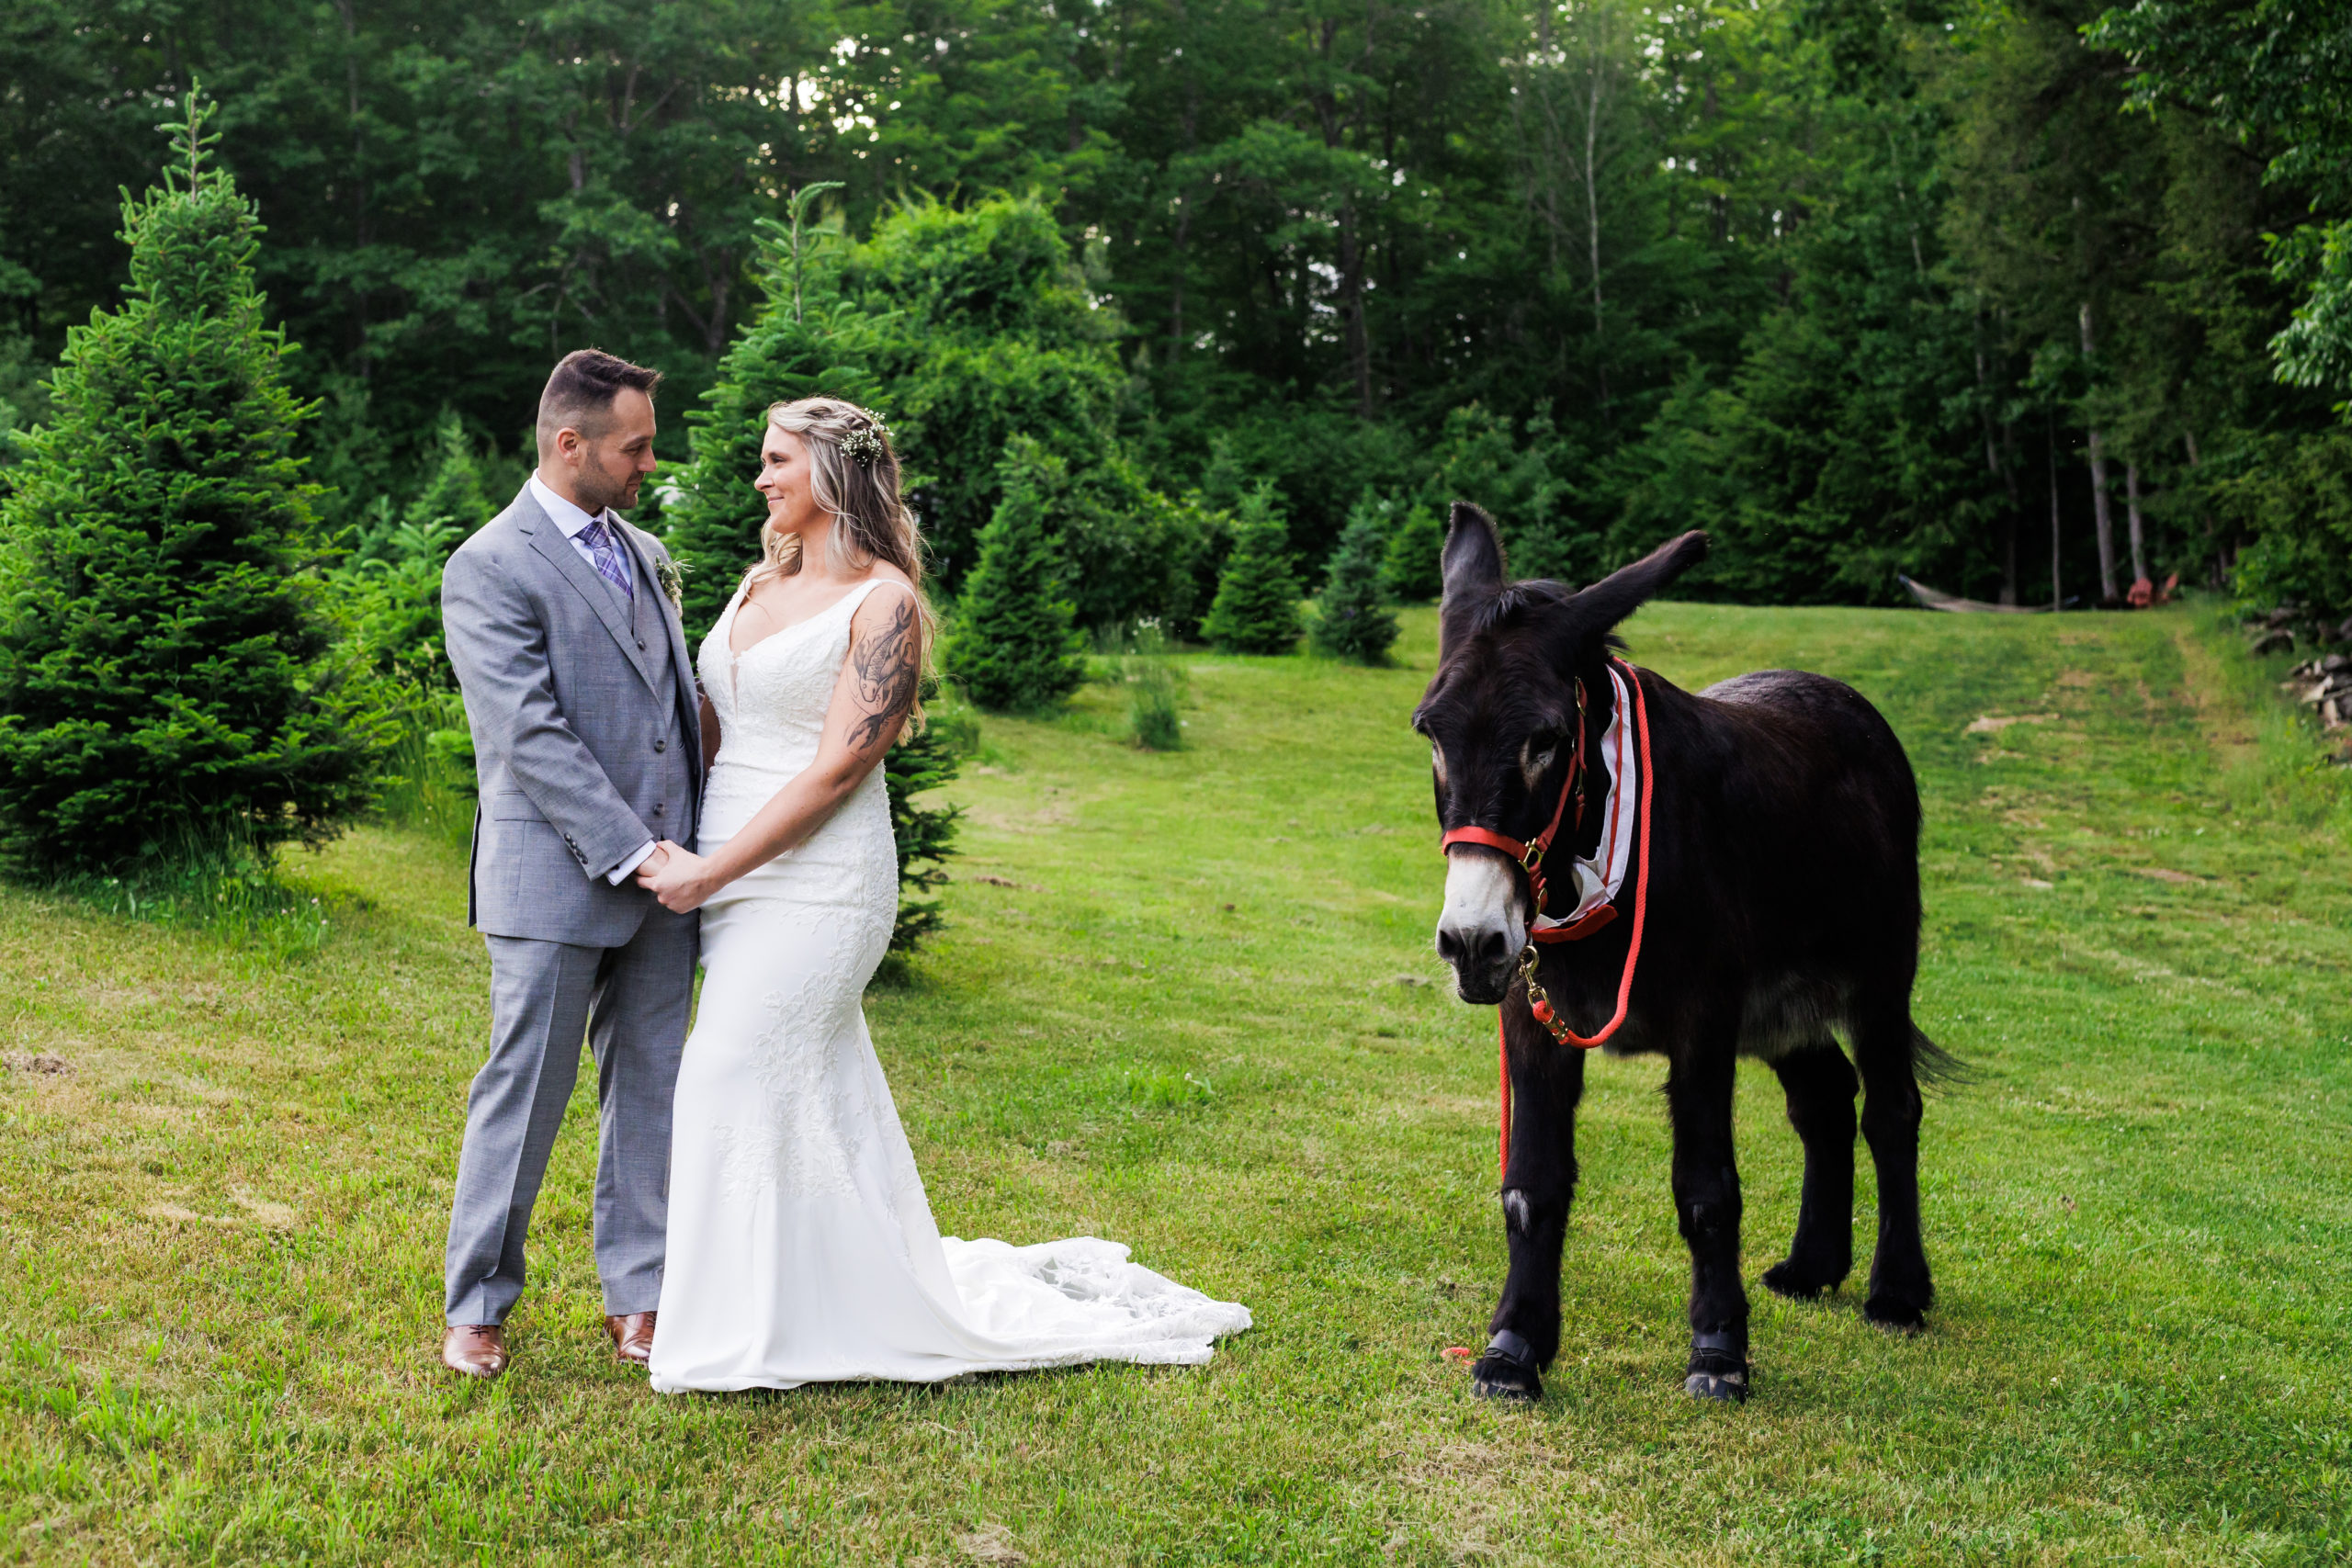 Amongst the trees and a friendly donkey after a wooded Maine elopement